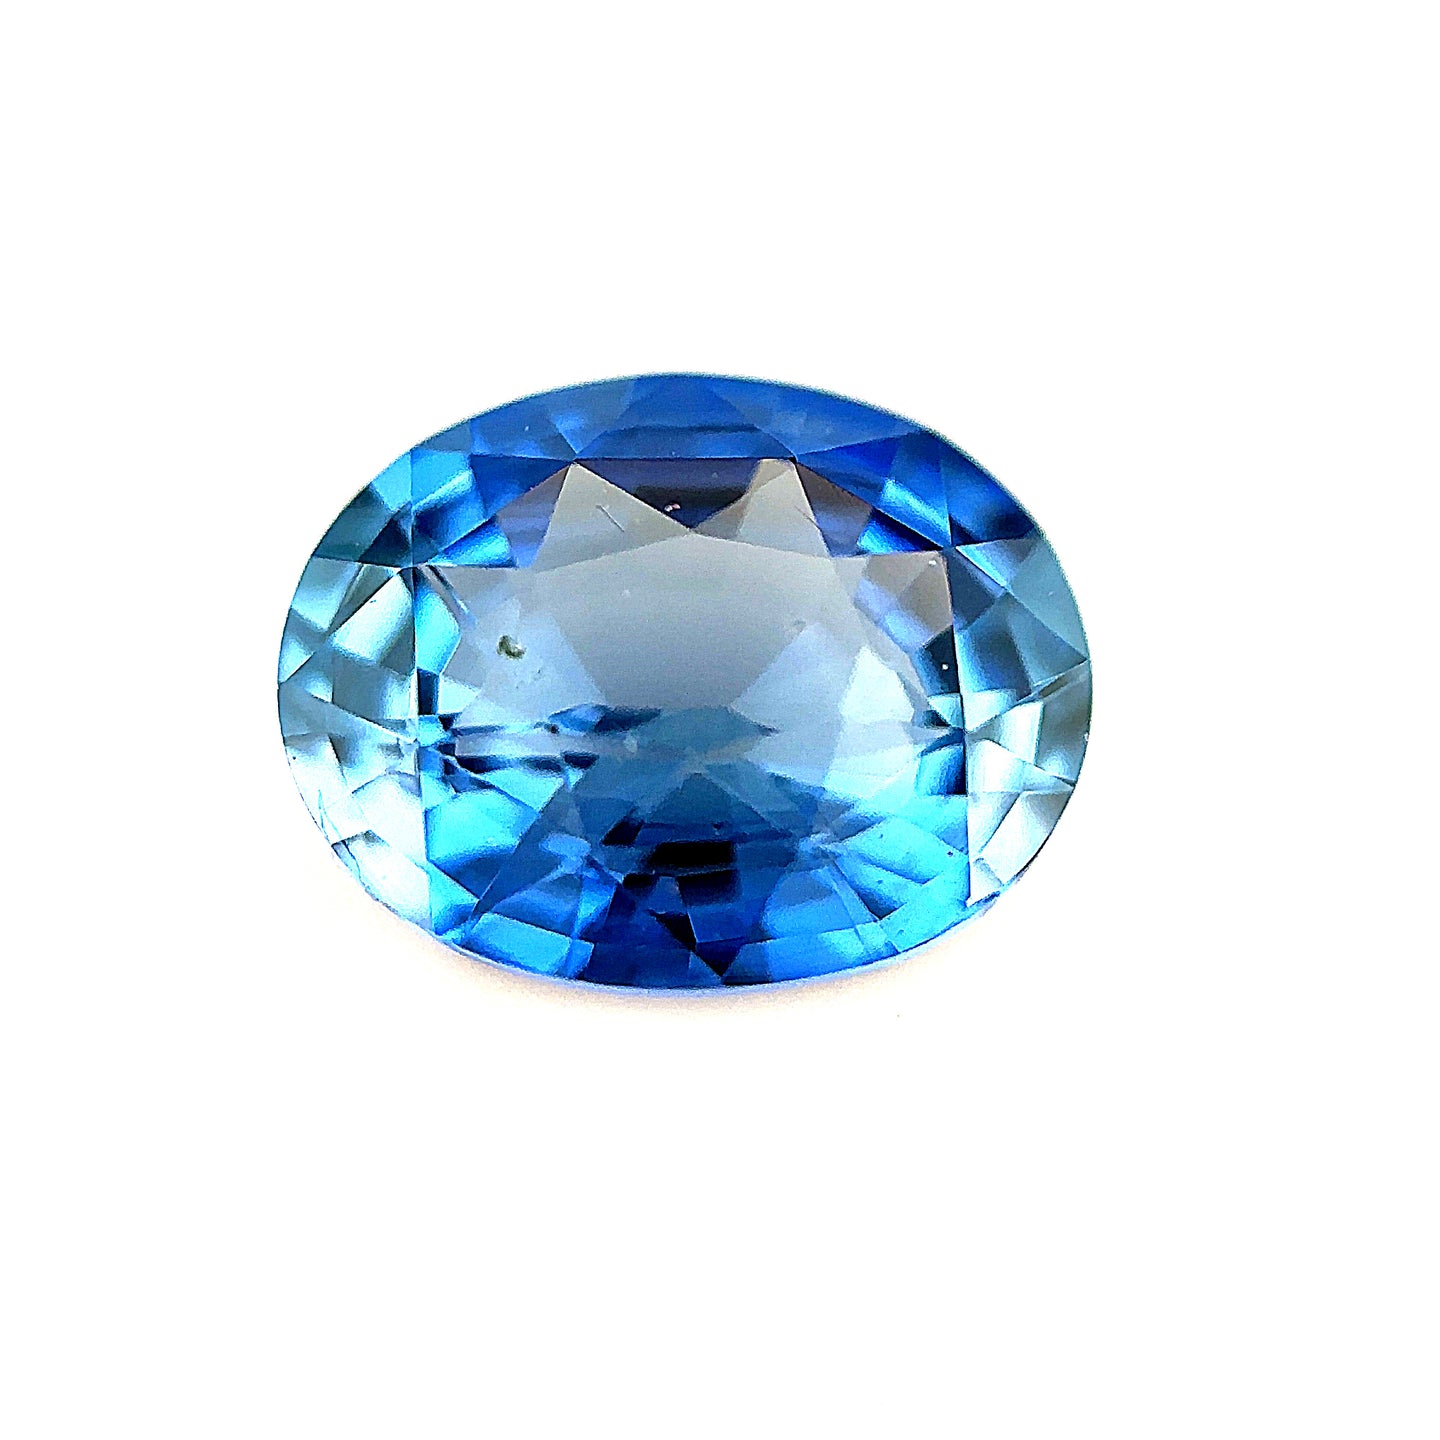 1.97 ct. EGL Certified Unheated Oval Blue Sapphire